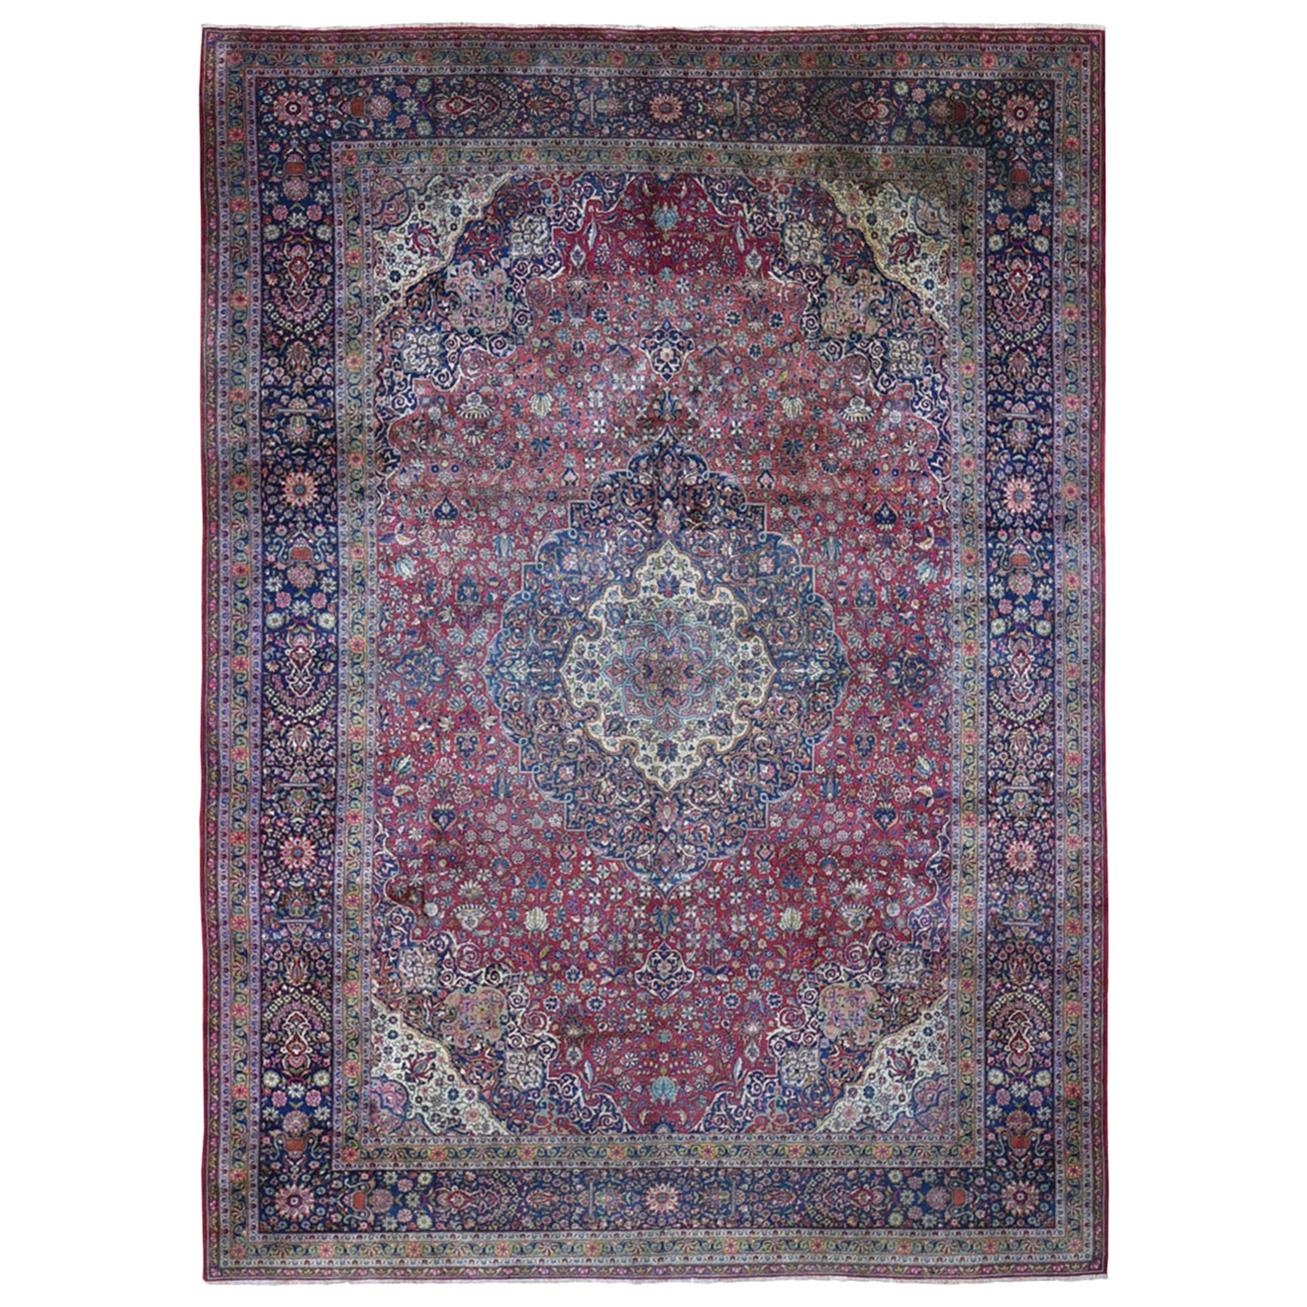 Antique Persian Kashan, Soft , Abrush, Hand Knotted Oriental Rug, 8'7" x 12'0"